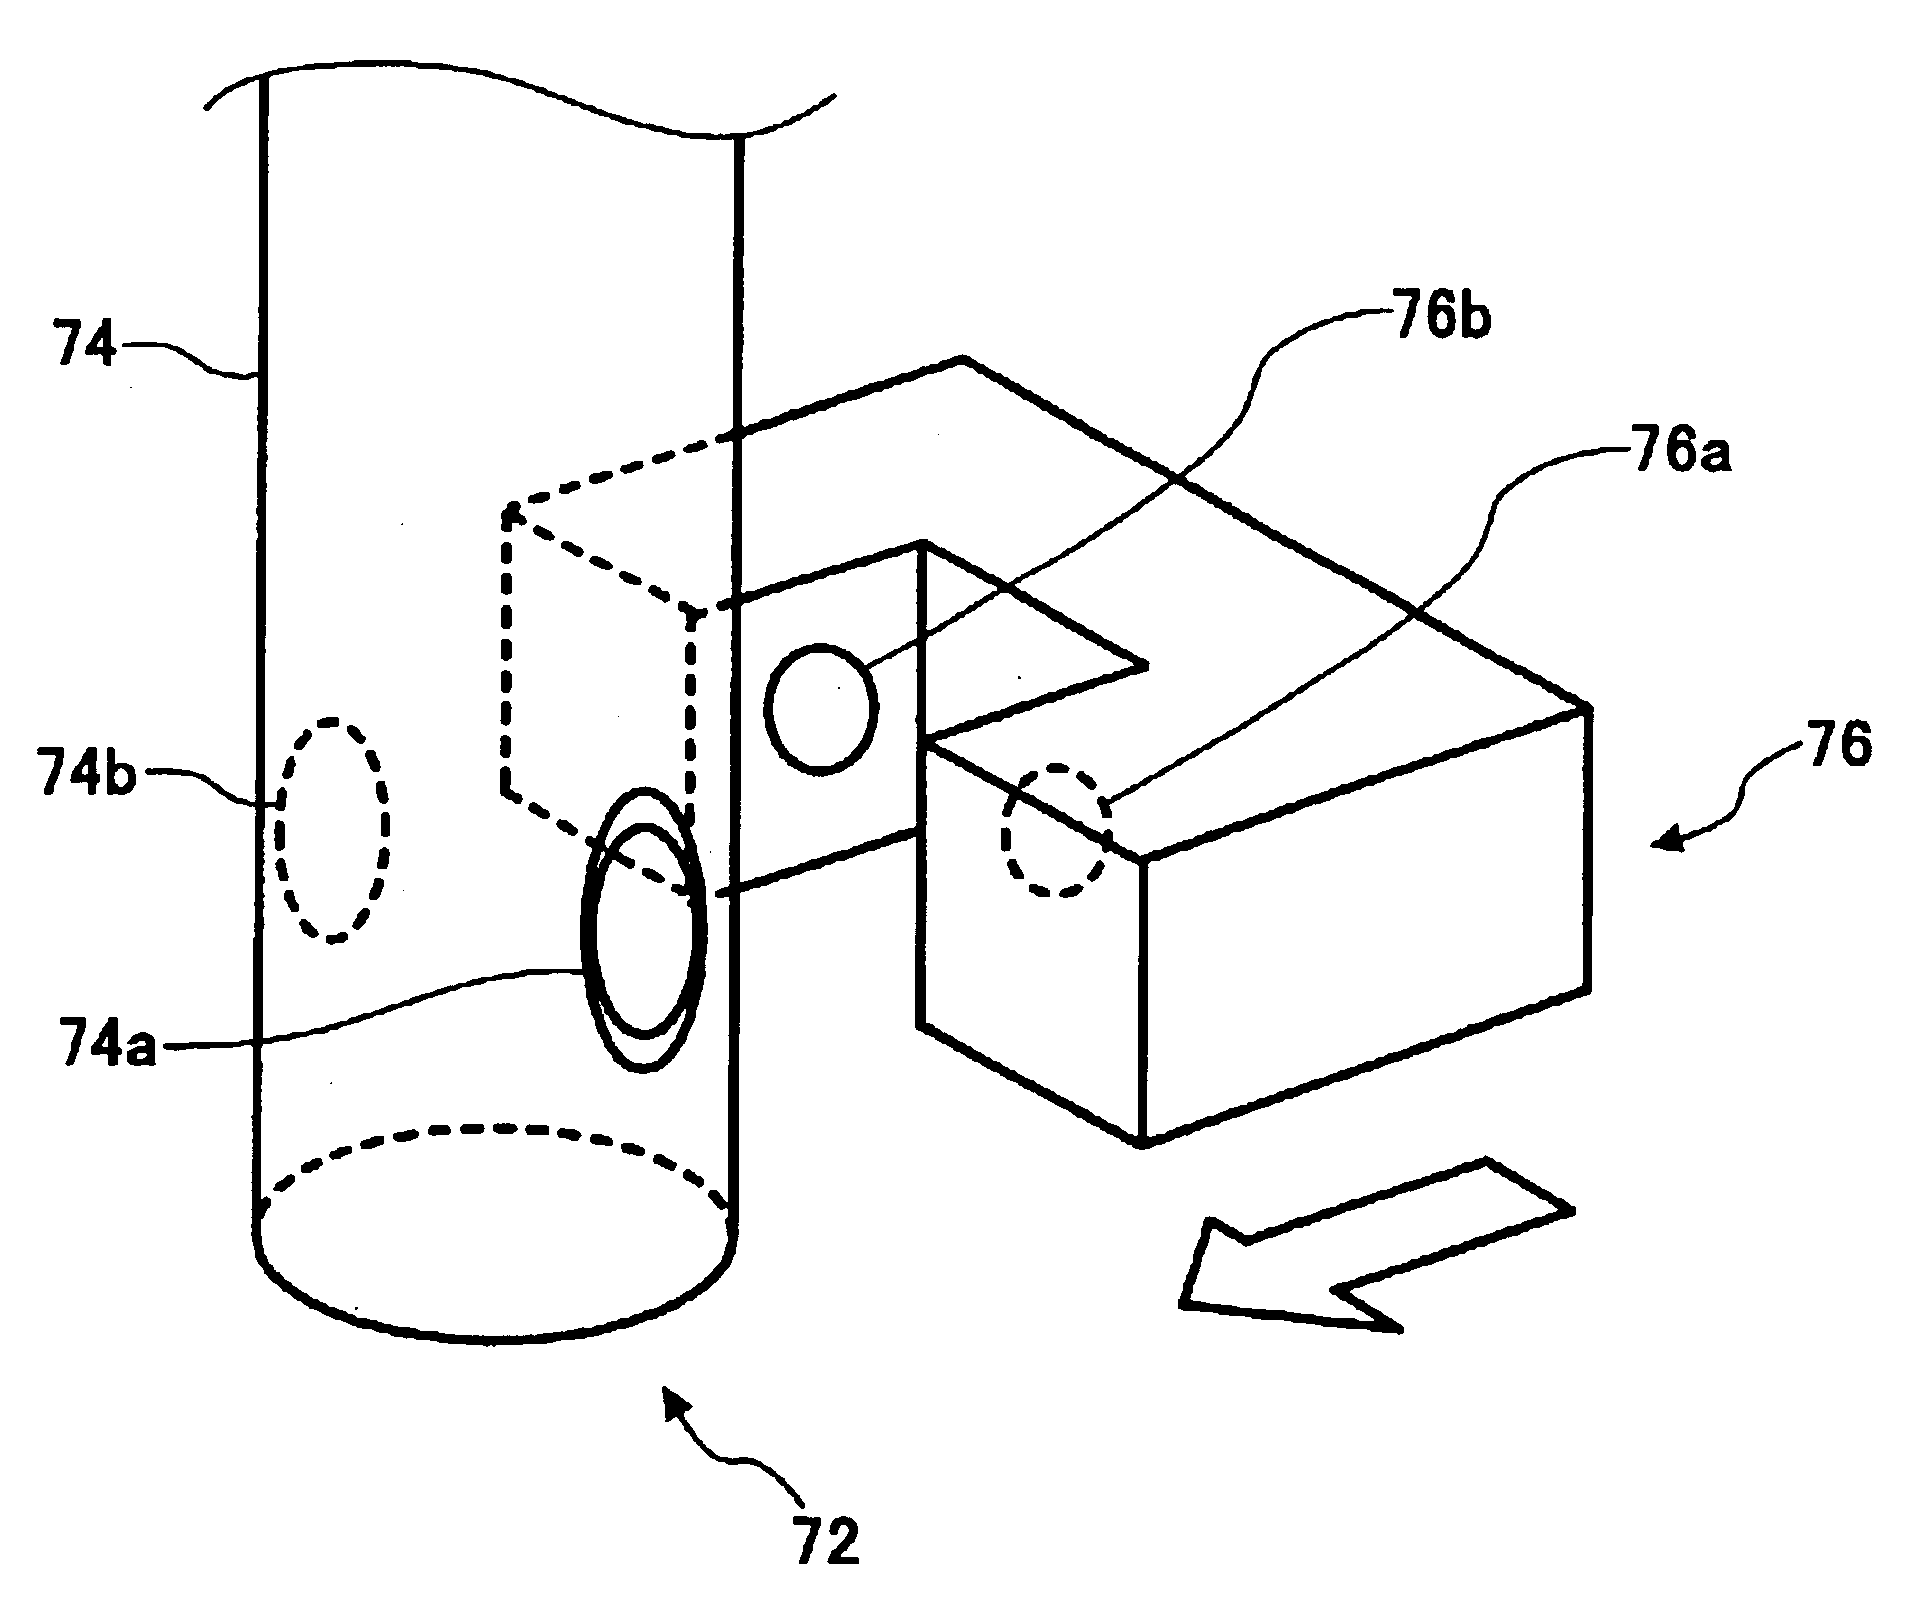 Toner conveying device and image forming apparatus including the toner conveying device